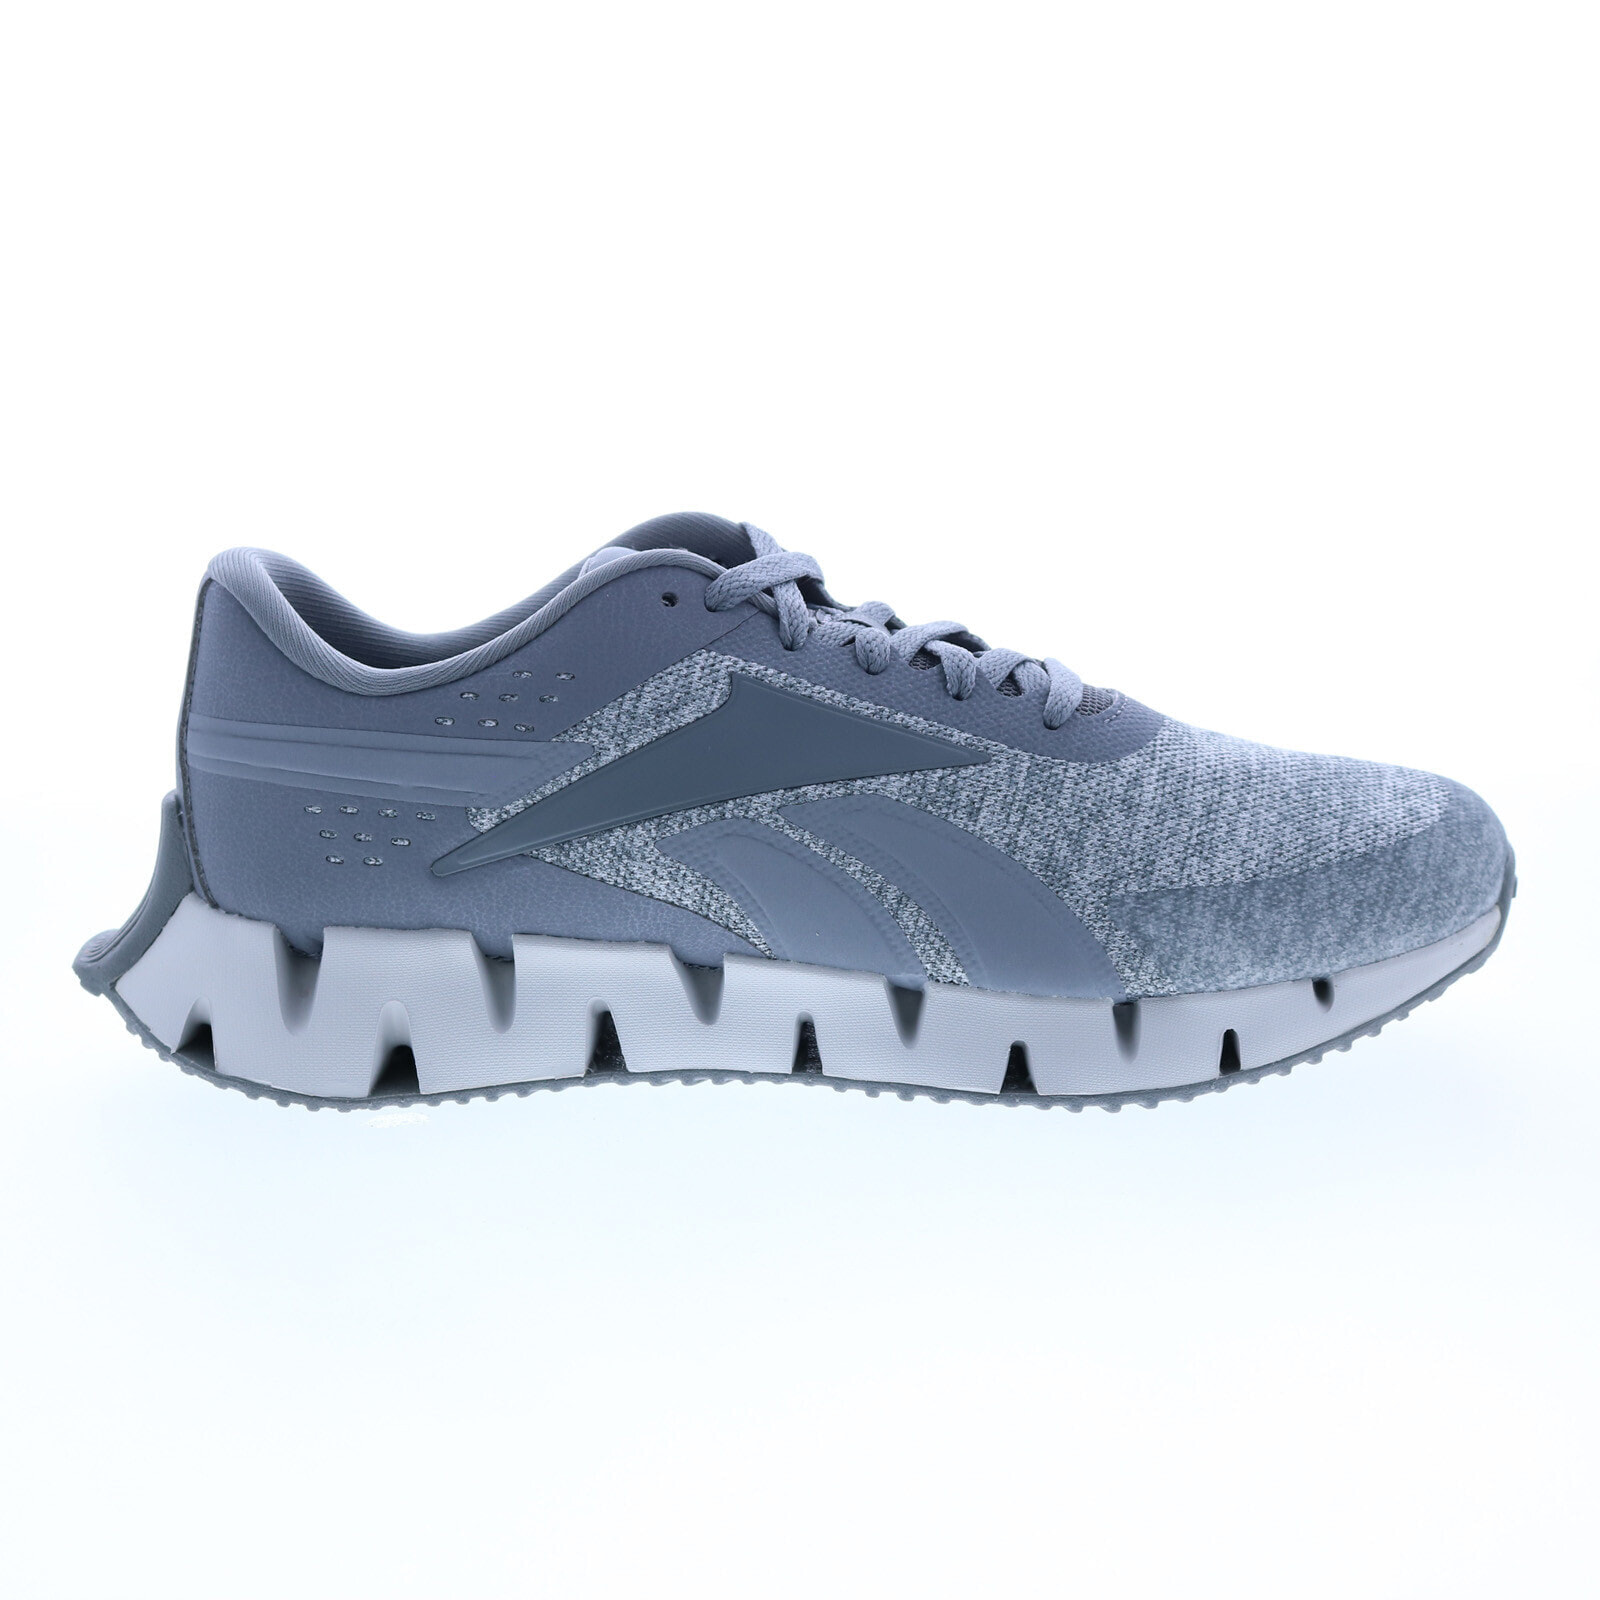 Reebok Zig Dynamica 2.0 HQ5896 Mens Gray Canvas Athletic Running Shoes